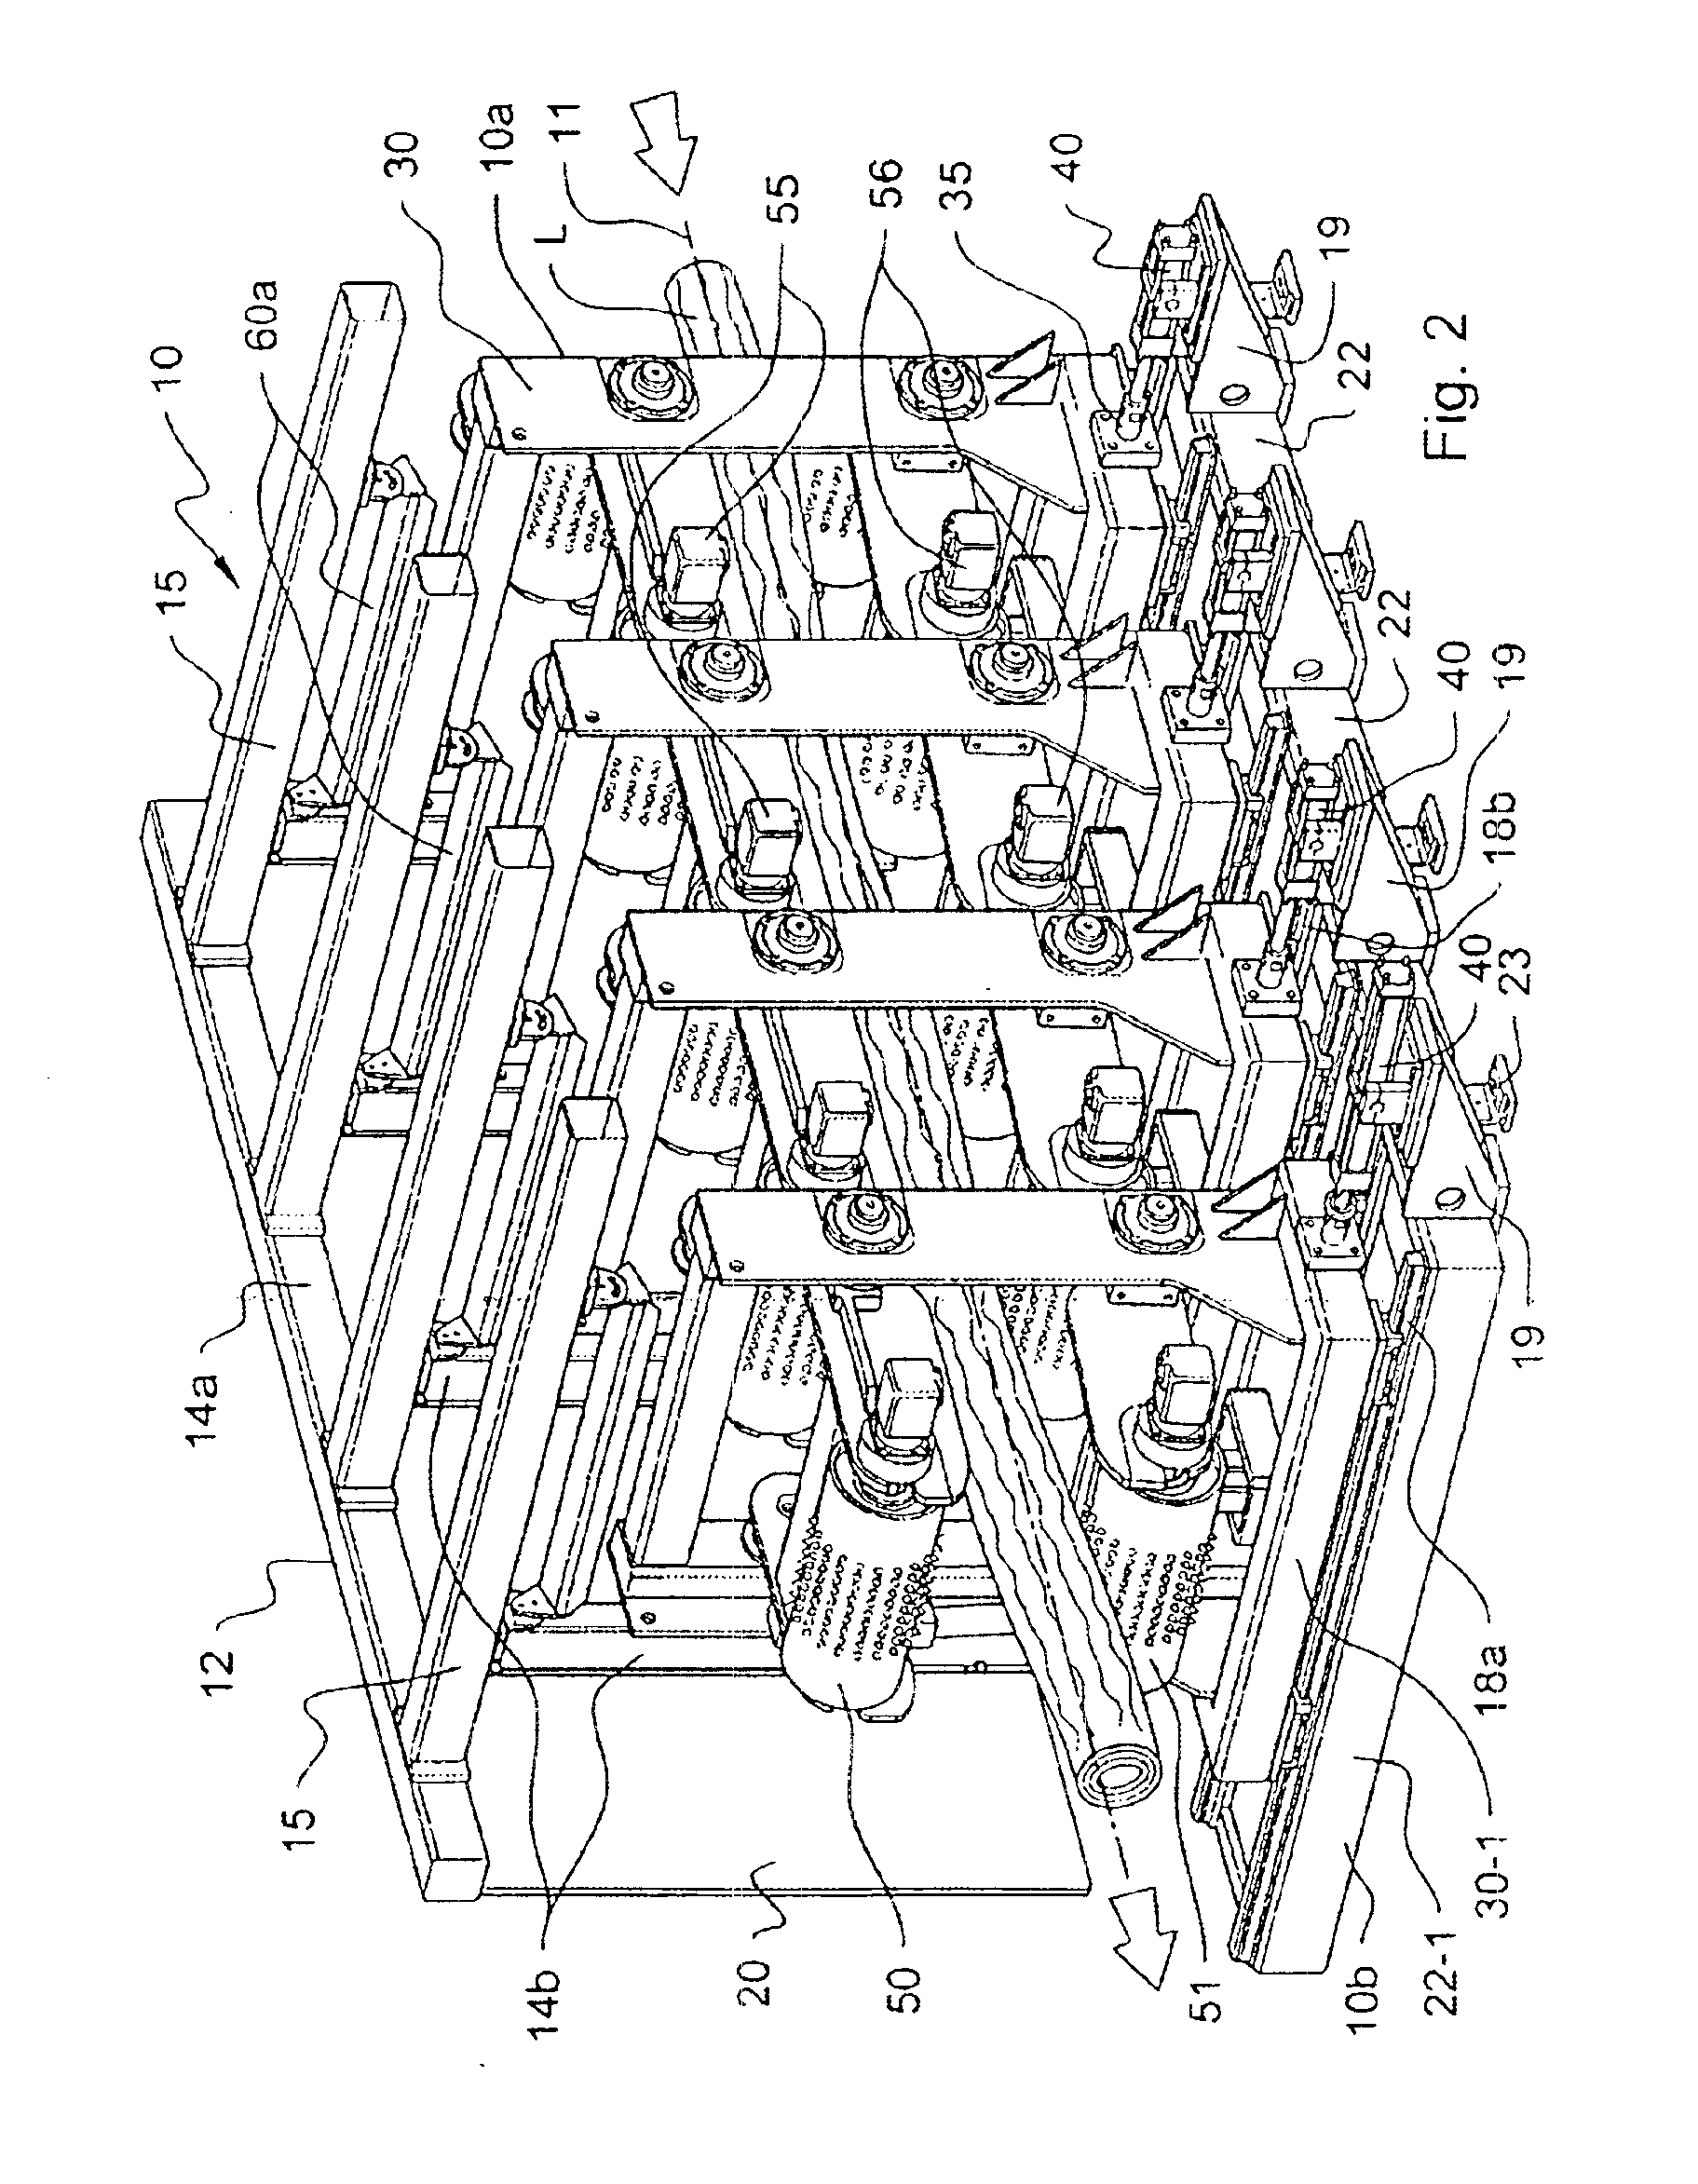 Log positioning and conveying apparatus